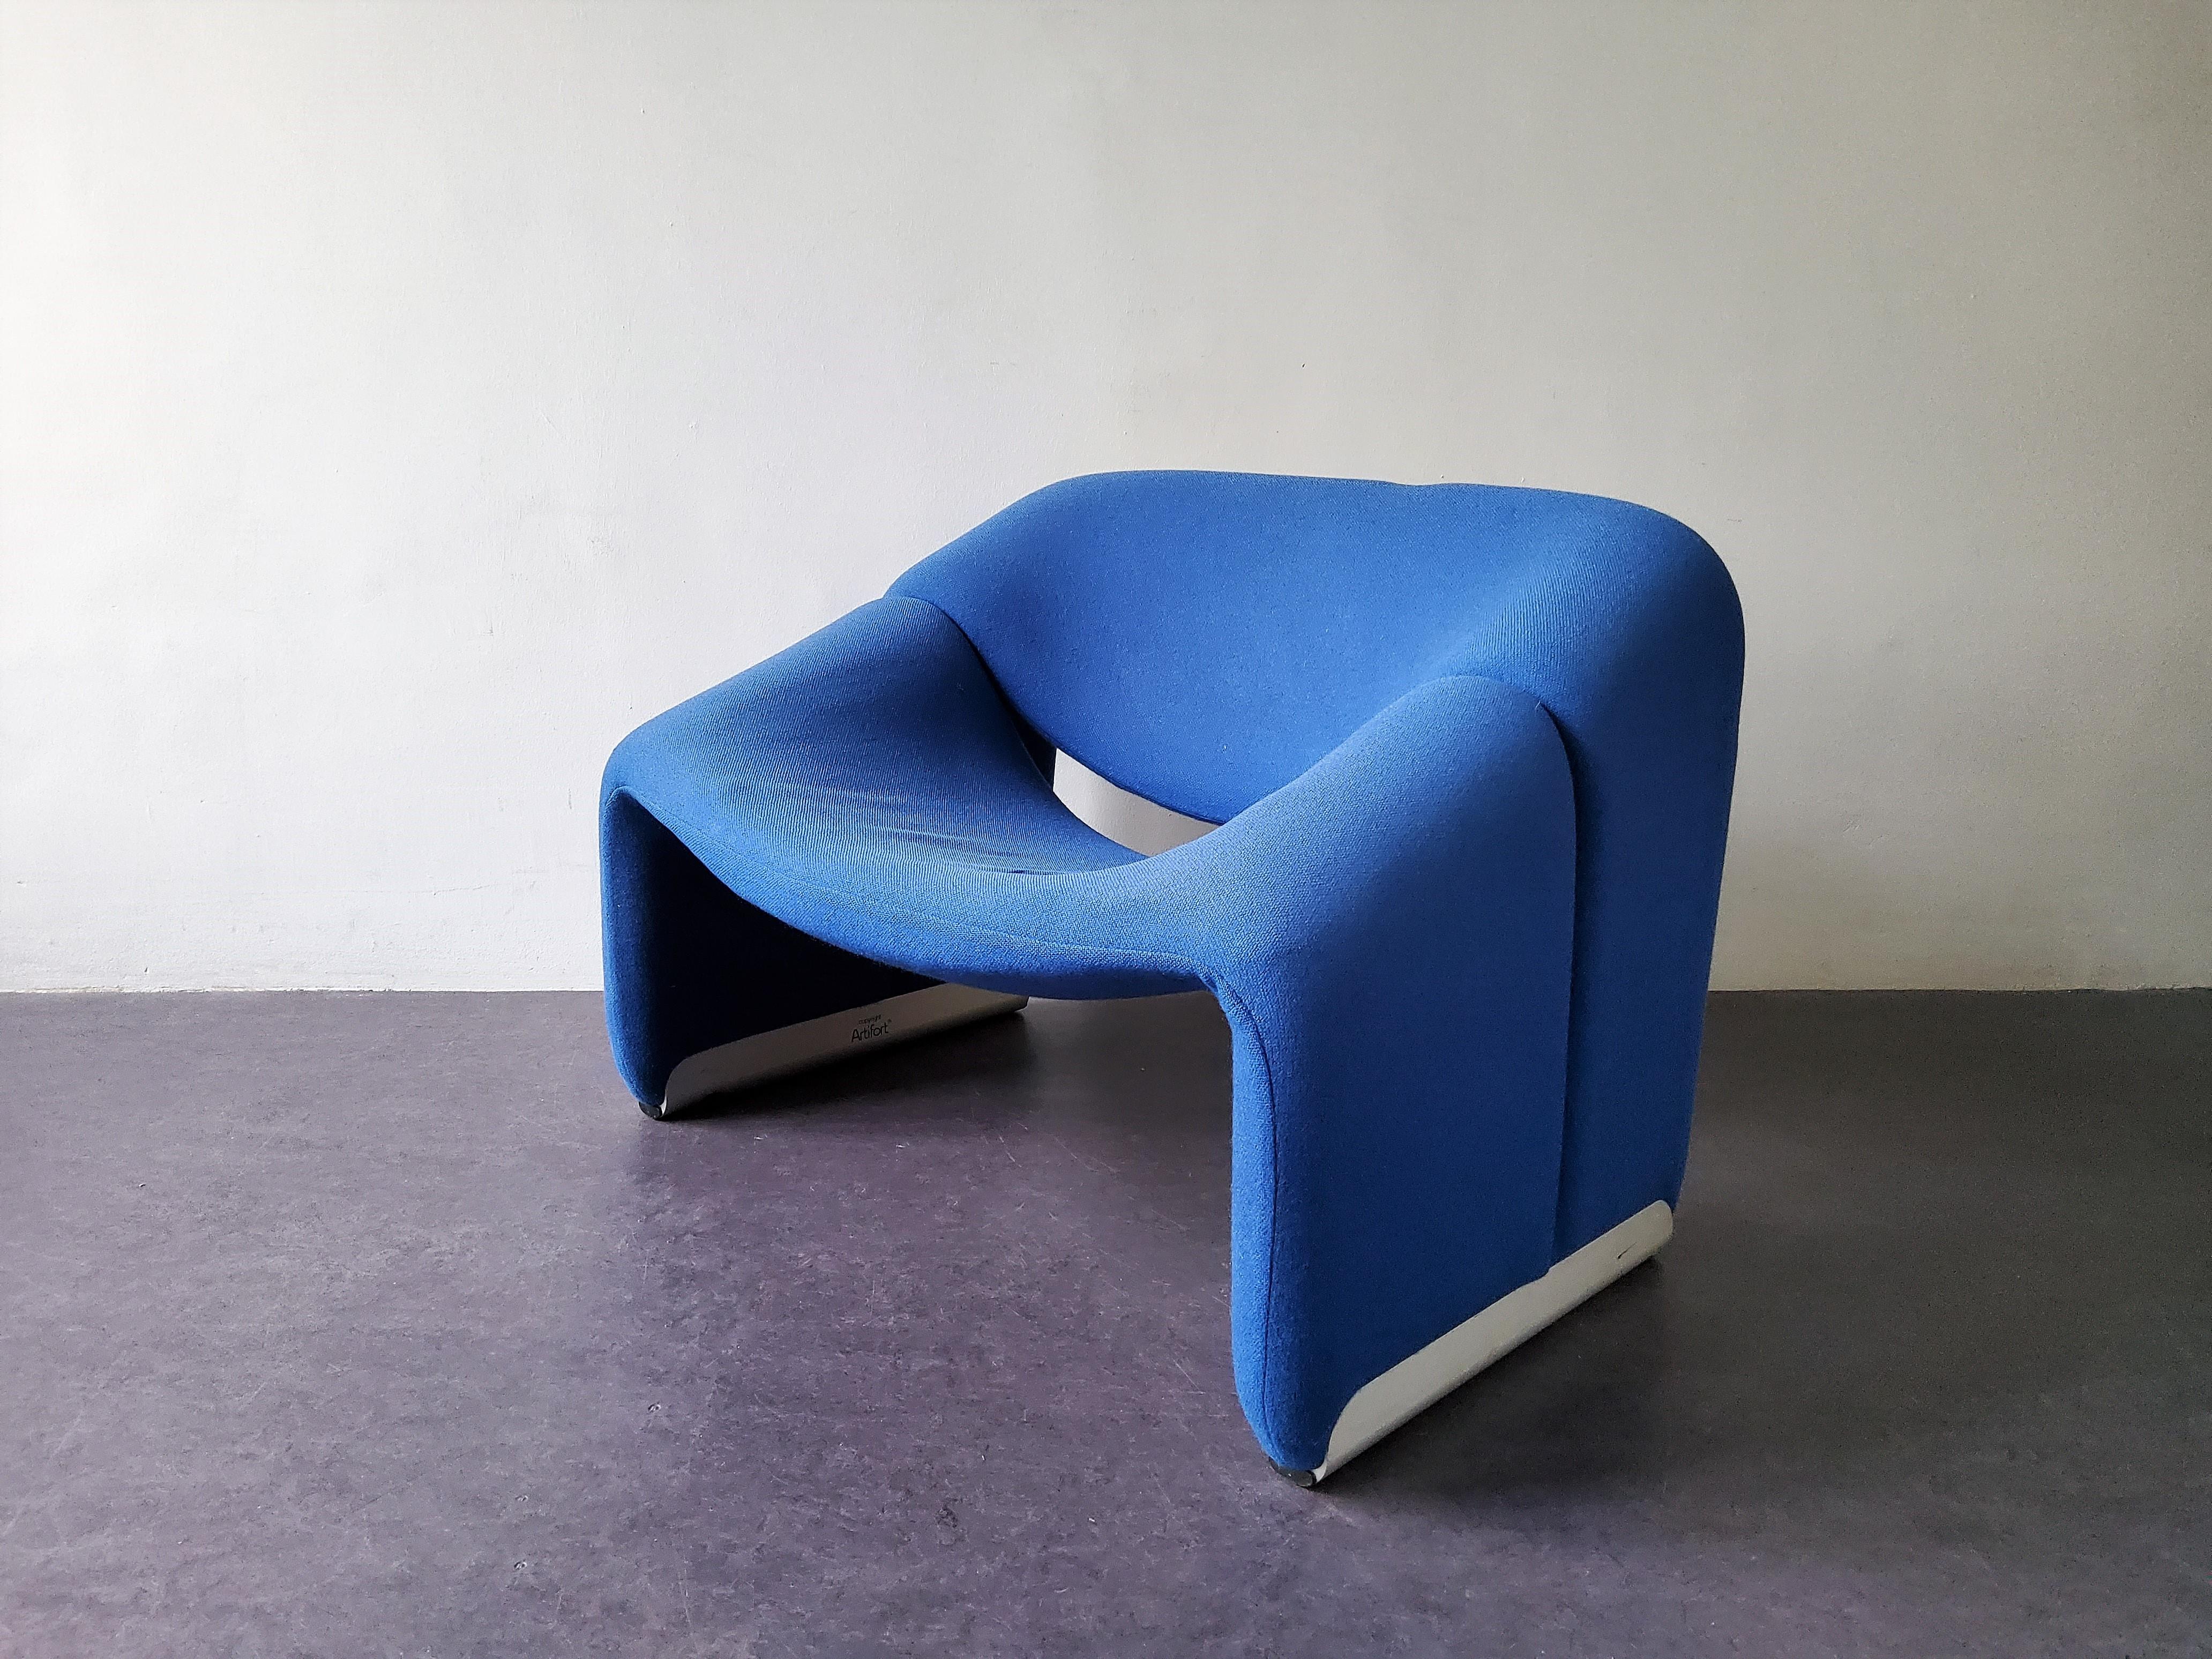 Late 20th Century Vintage 'Groovy' or F598 Lounge Chair in Blue by Pierre Paulin for Artifort